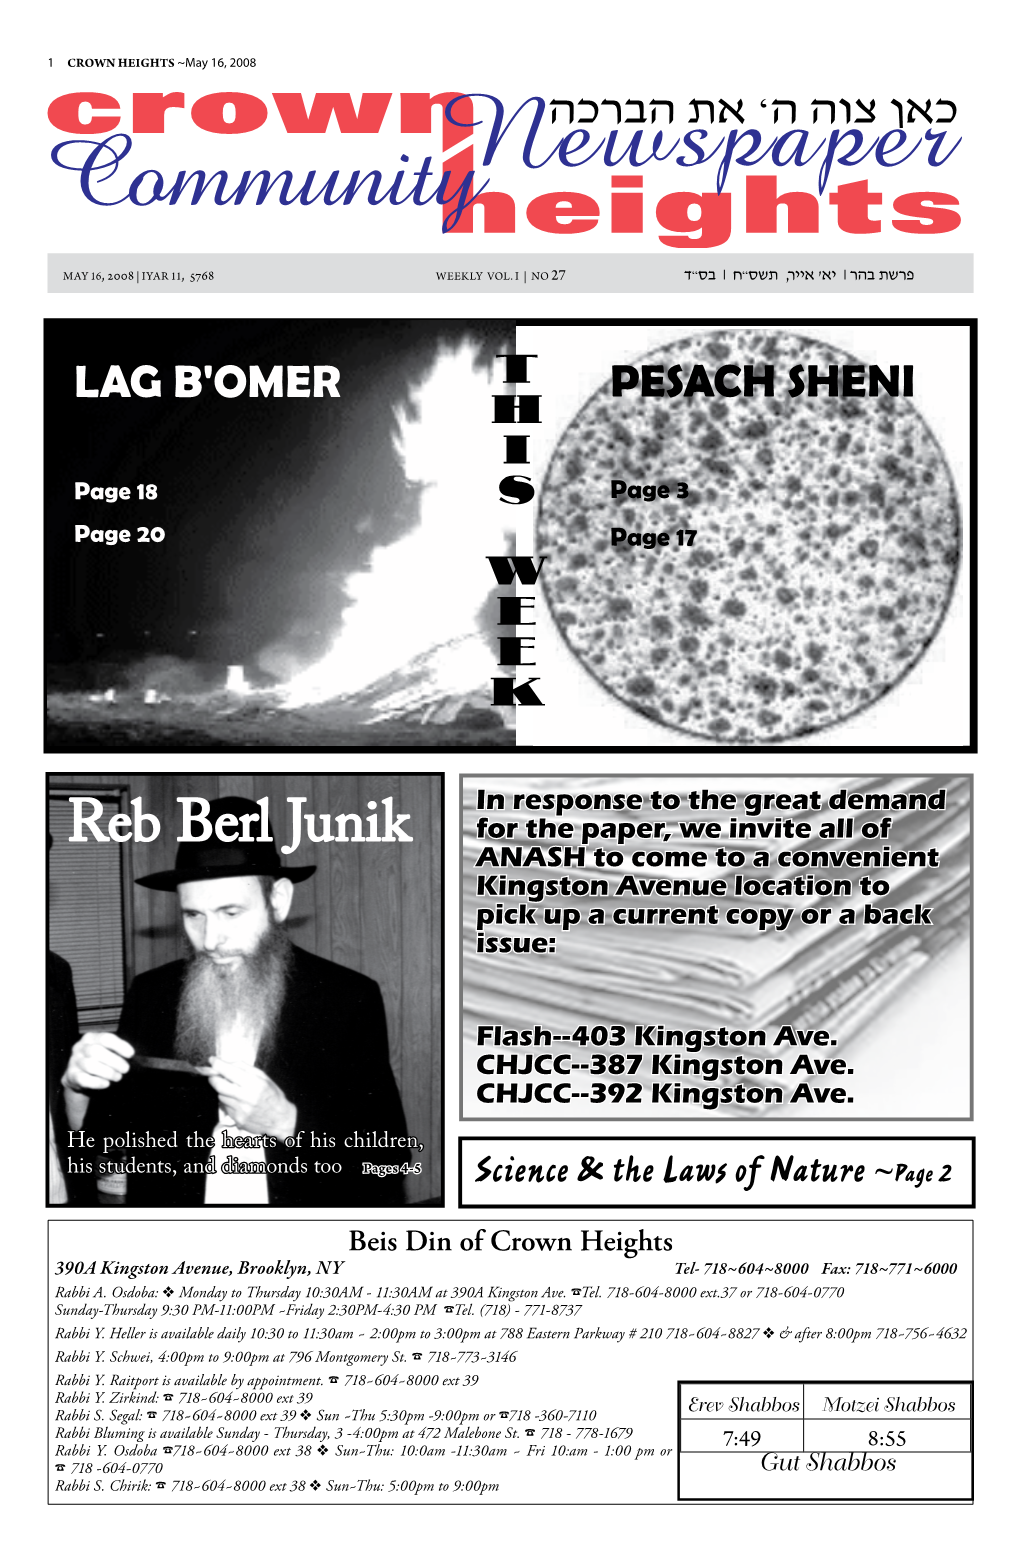 Reb Berl Junik ANASH to Come to a Convenient Kingston Avenue Location to Pick up a Current Copy Or a Back Issue